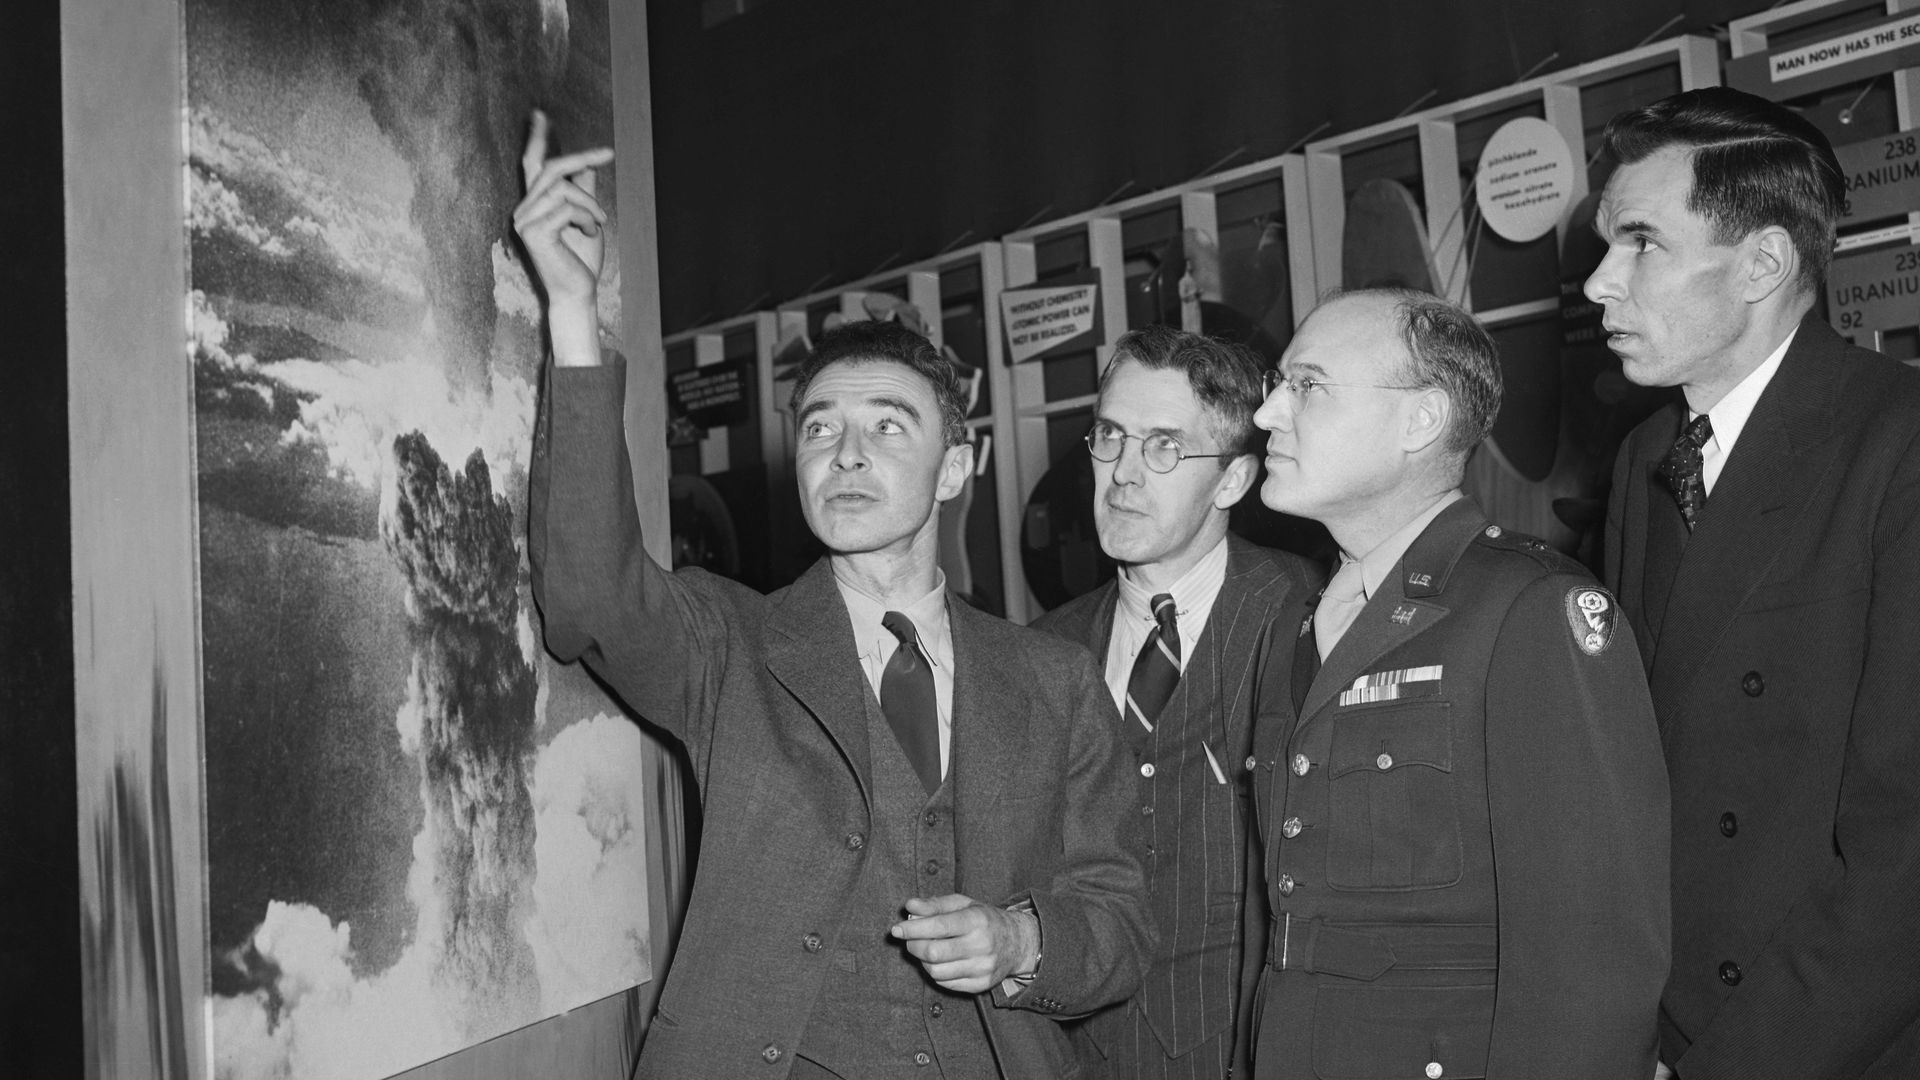 Man pointing to a poster of a bomb while three other men look on.